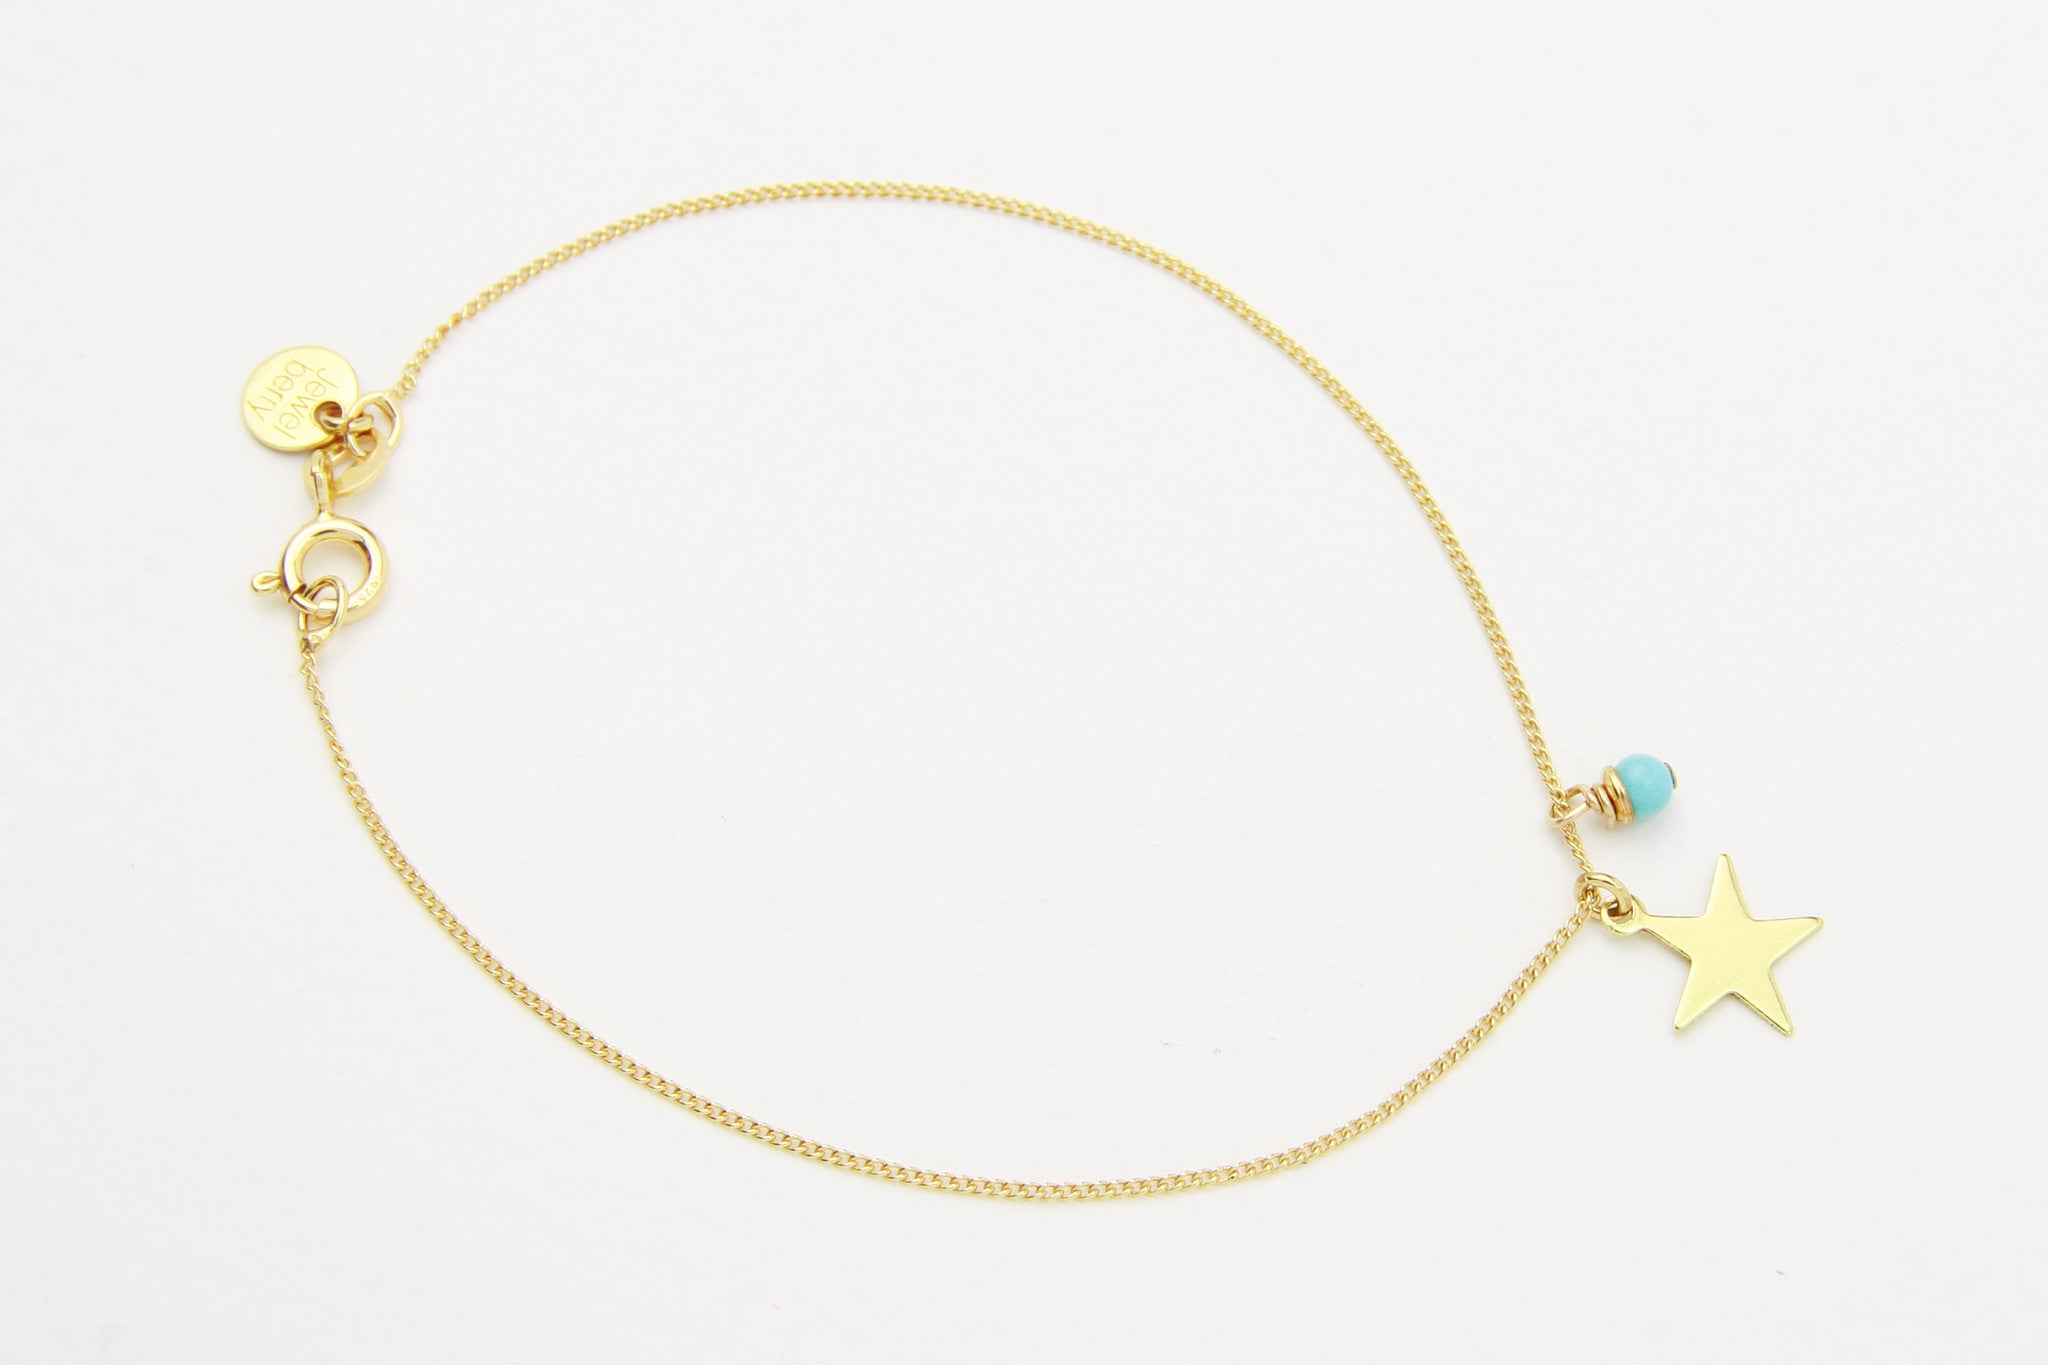 jewelberry armband bracelet plain star yellow gold plated sterling silver fine jewelry handmade with love fairtrade curb chain